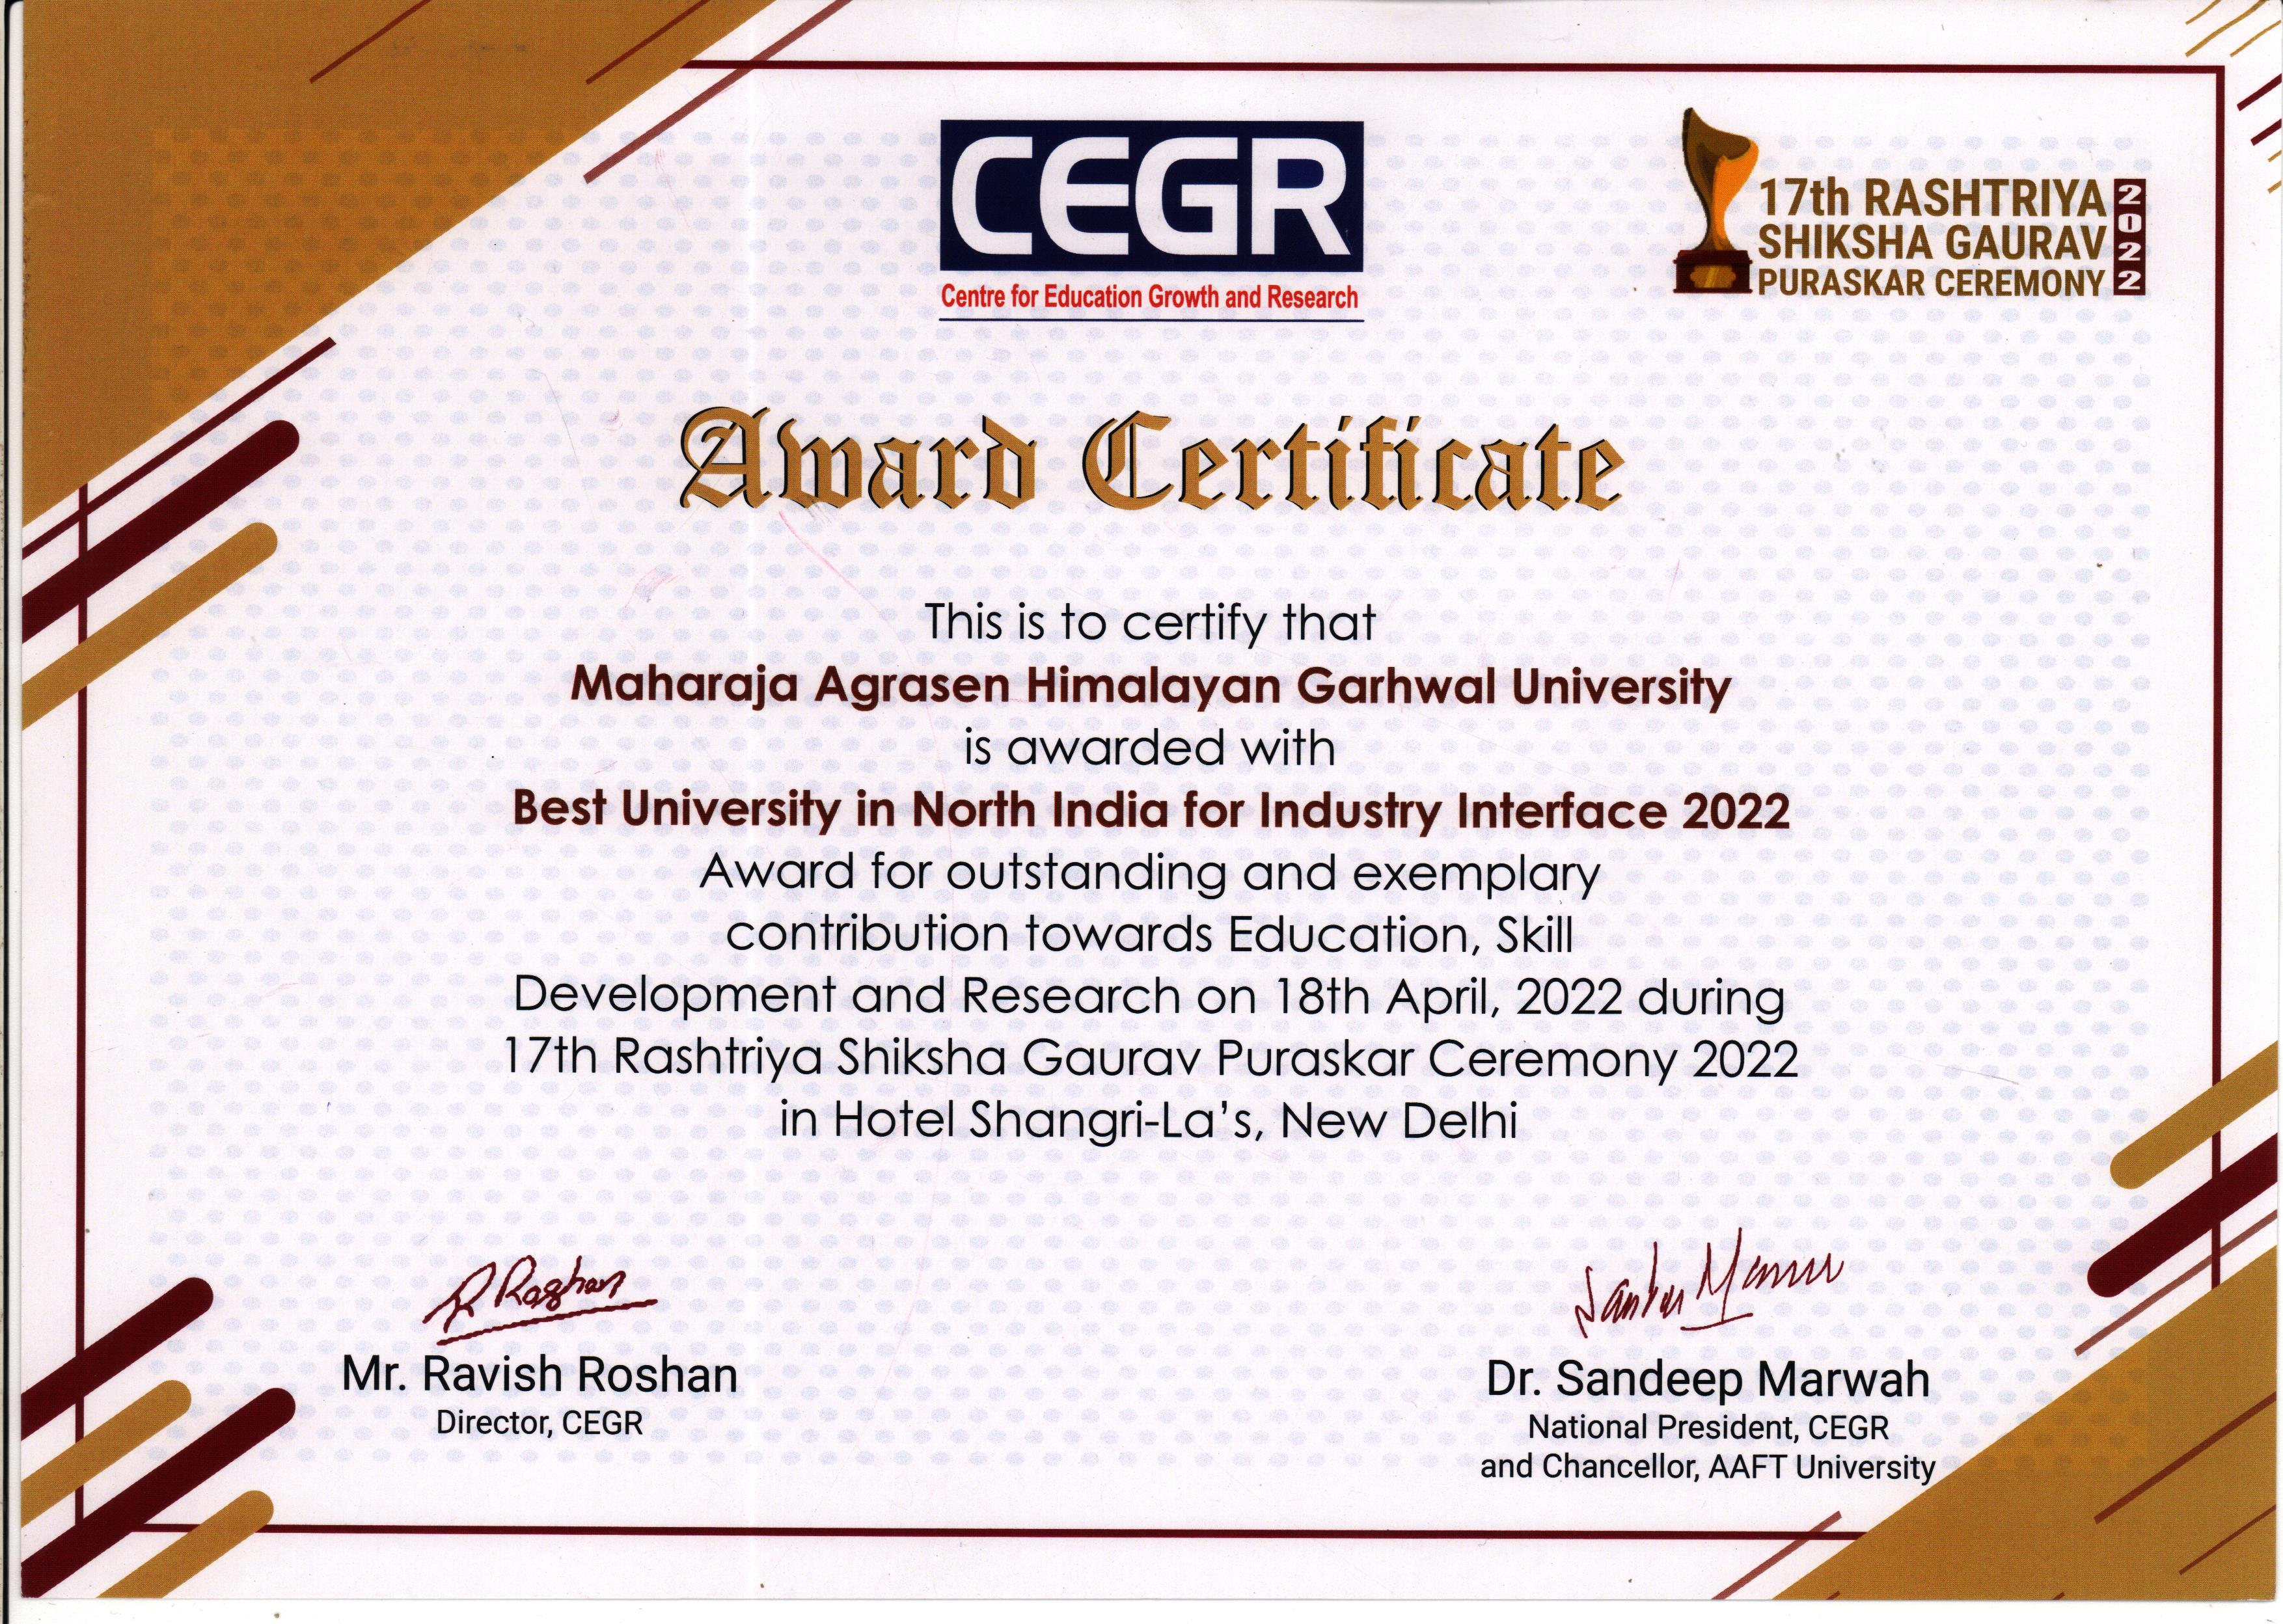 MAHGU awarded with Best University in North India for Industry Interface 2022